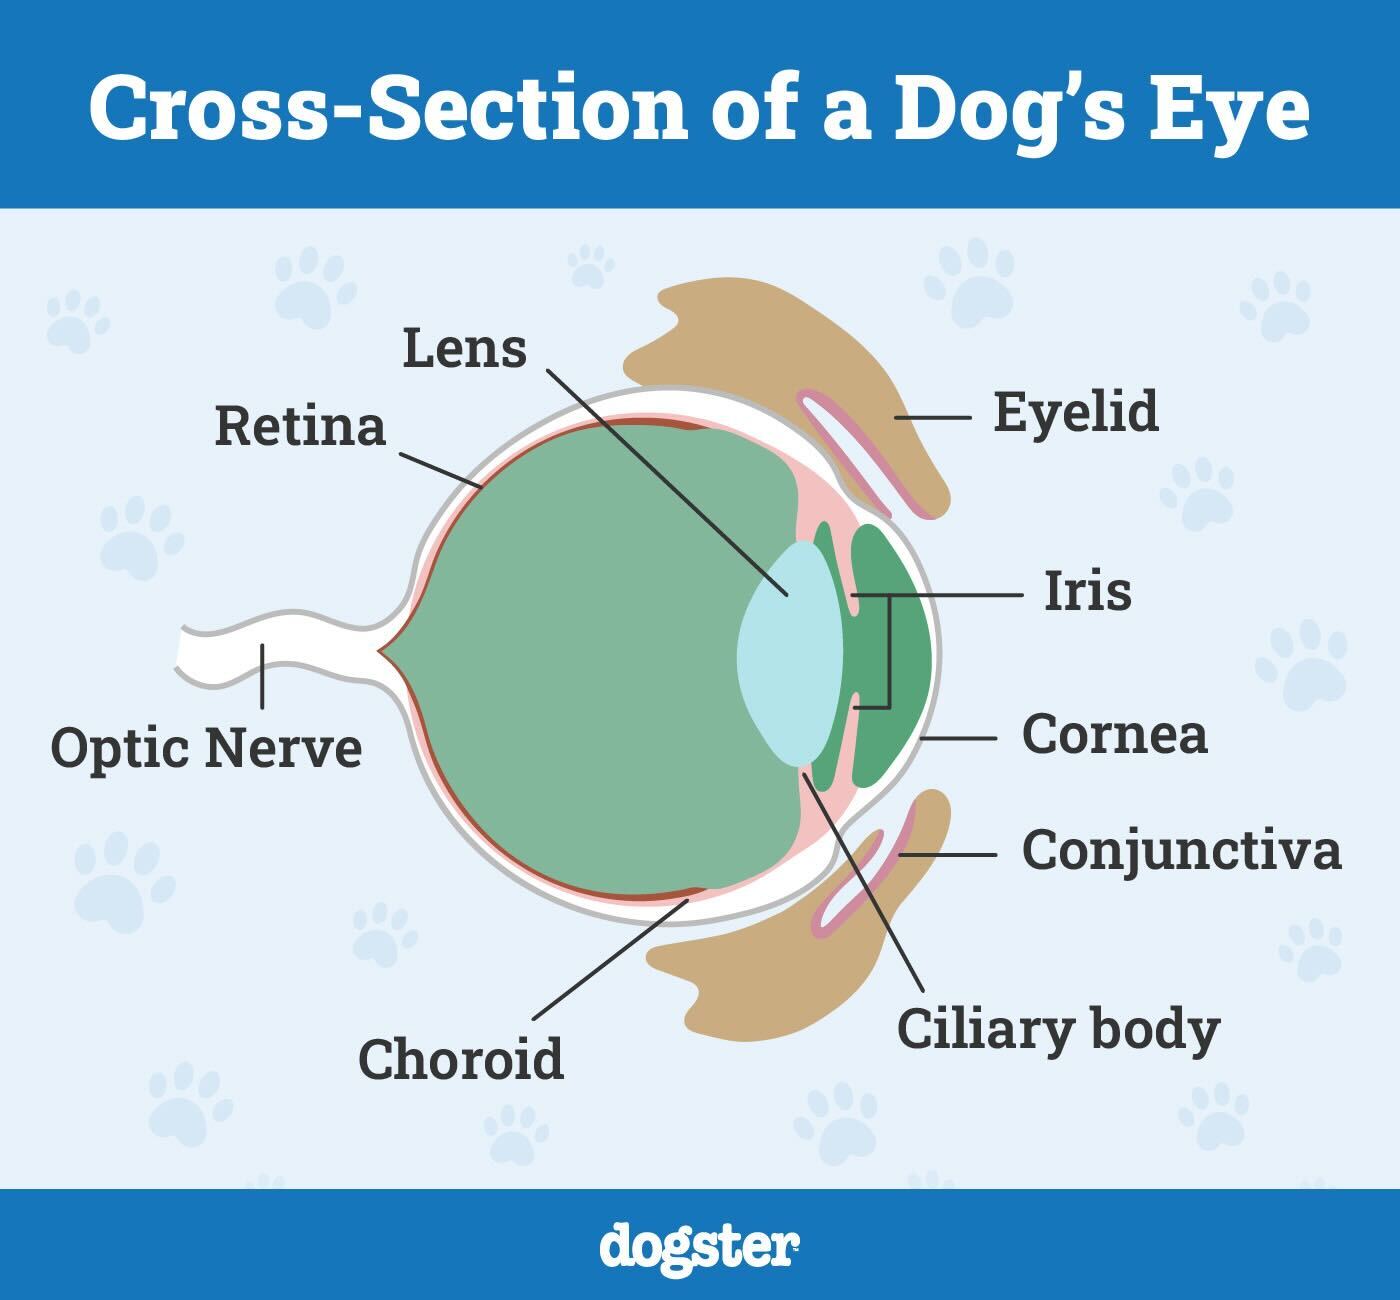 Cross-Section of a Dog's Eye Infographic